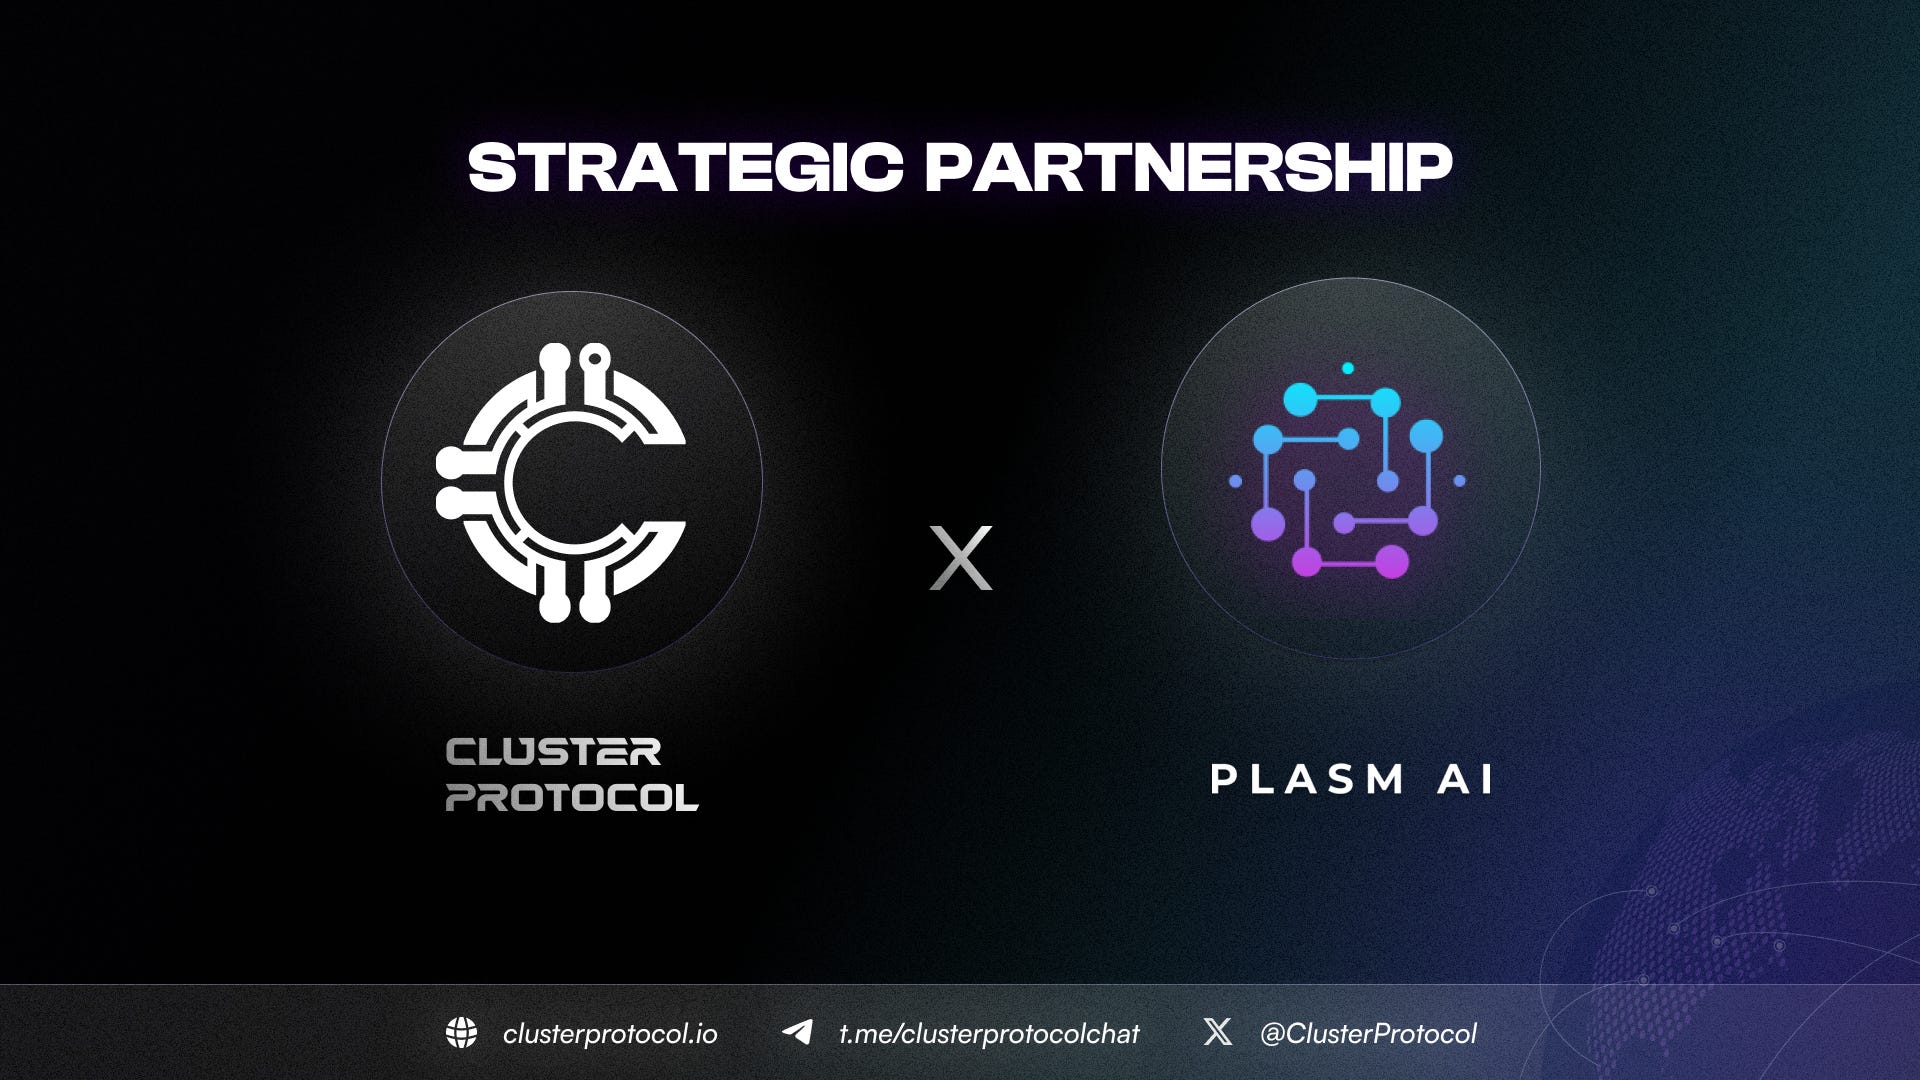 Revolutionizing Gaming: The Plasm AI and Cluster Protocol Partnership